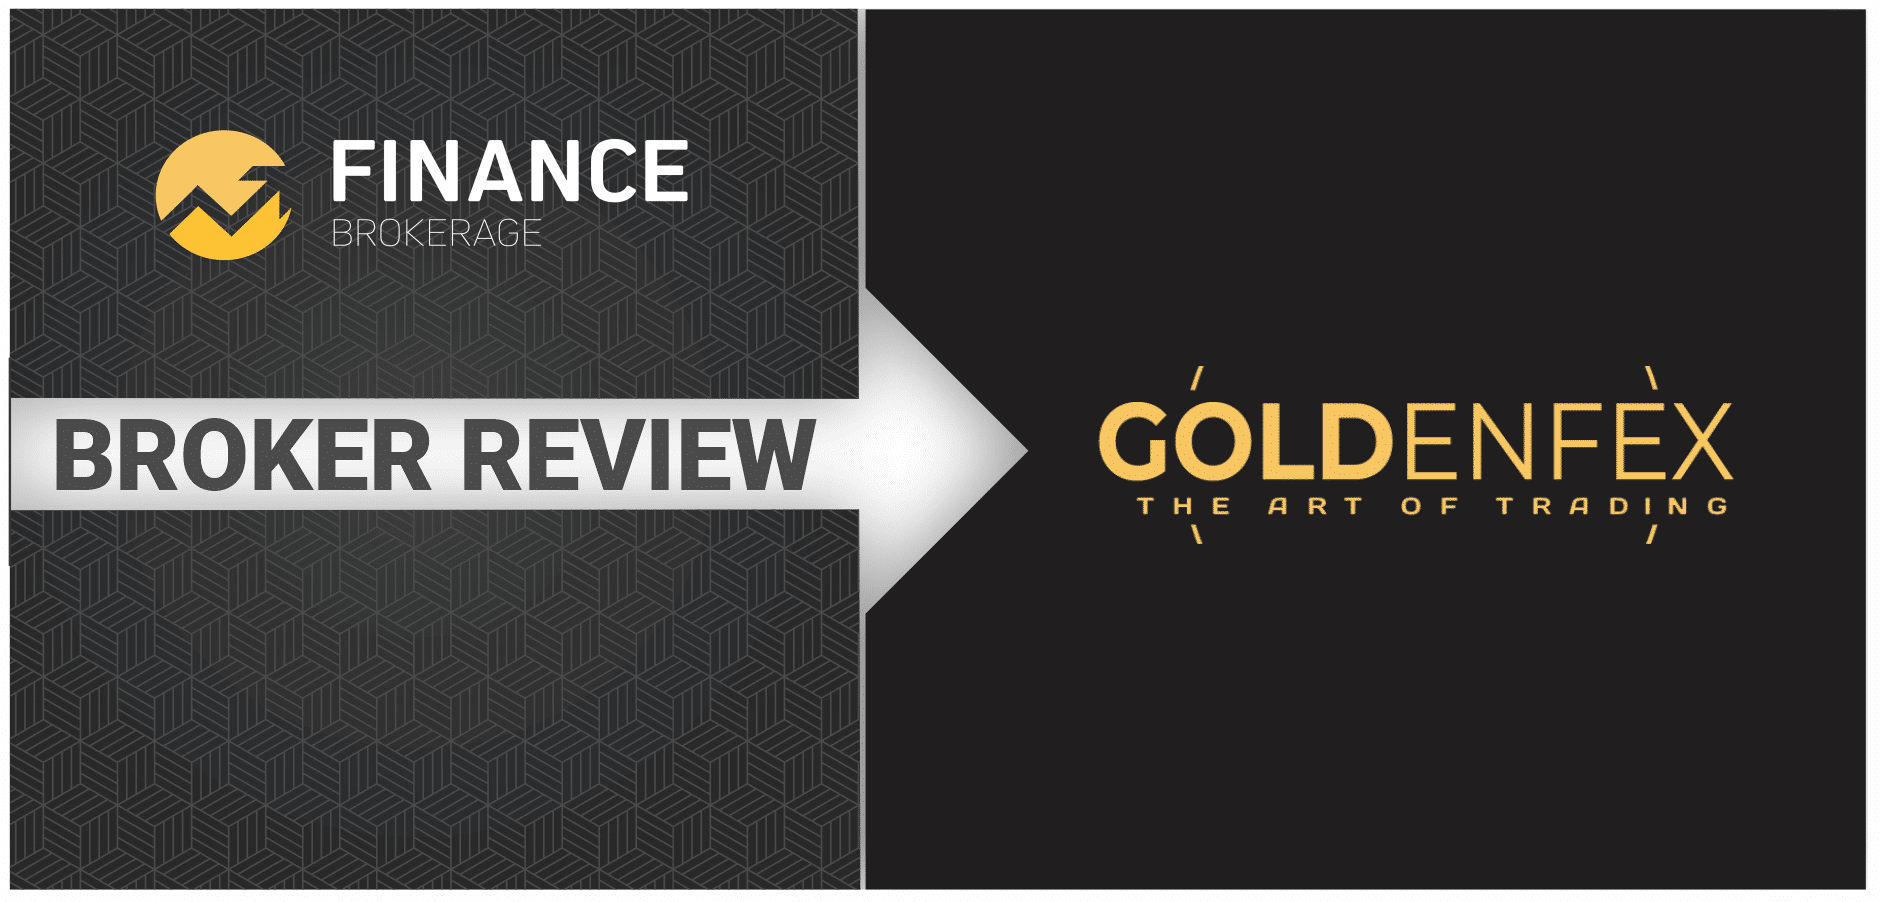 GoldenFex Review